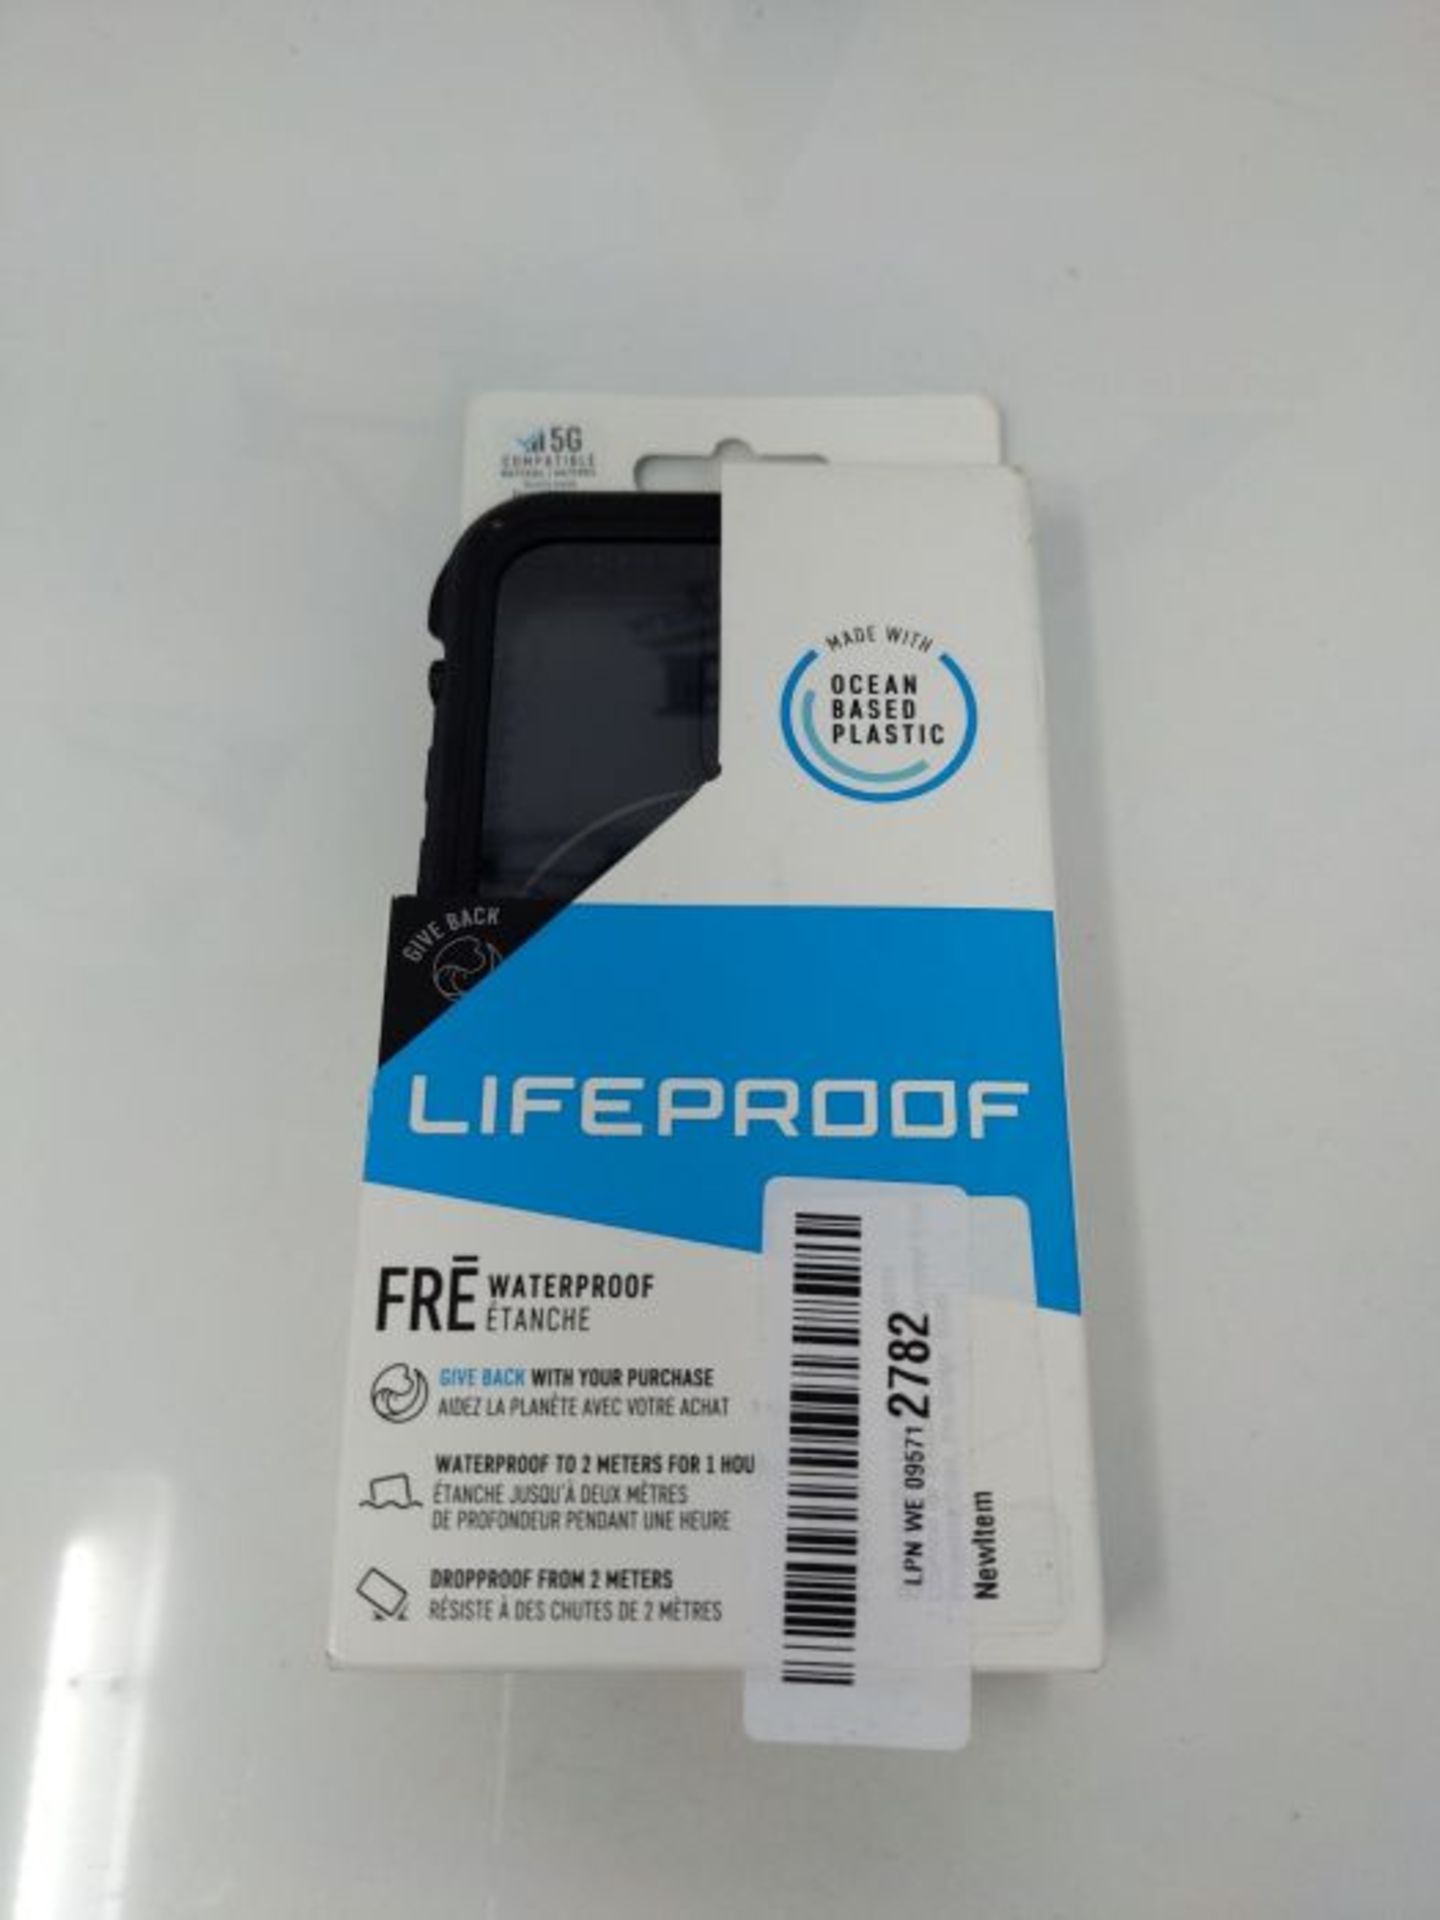 LifeProof for iPhone 12 Pro, Waterproof Drop Protective Case, Fre Series, Black - Image 4 of 9